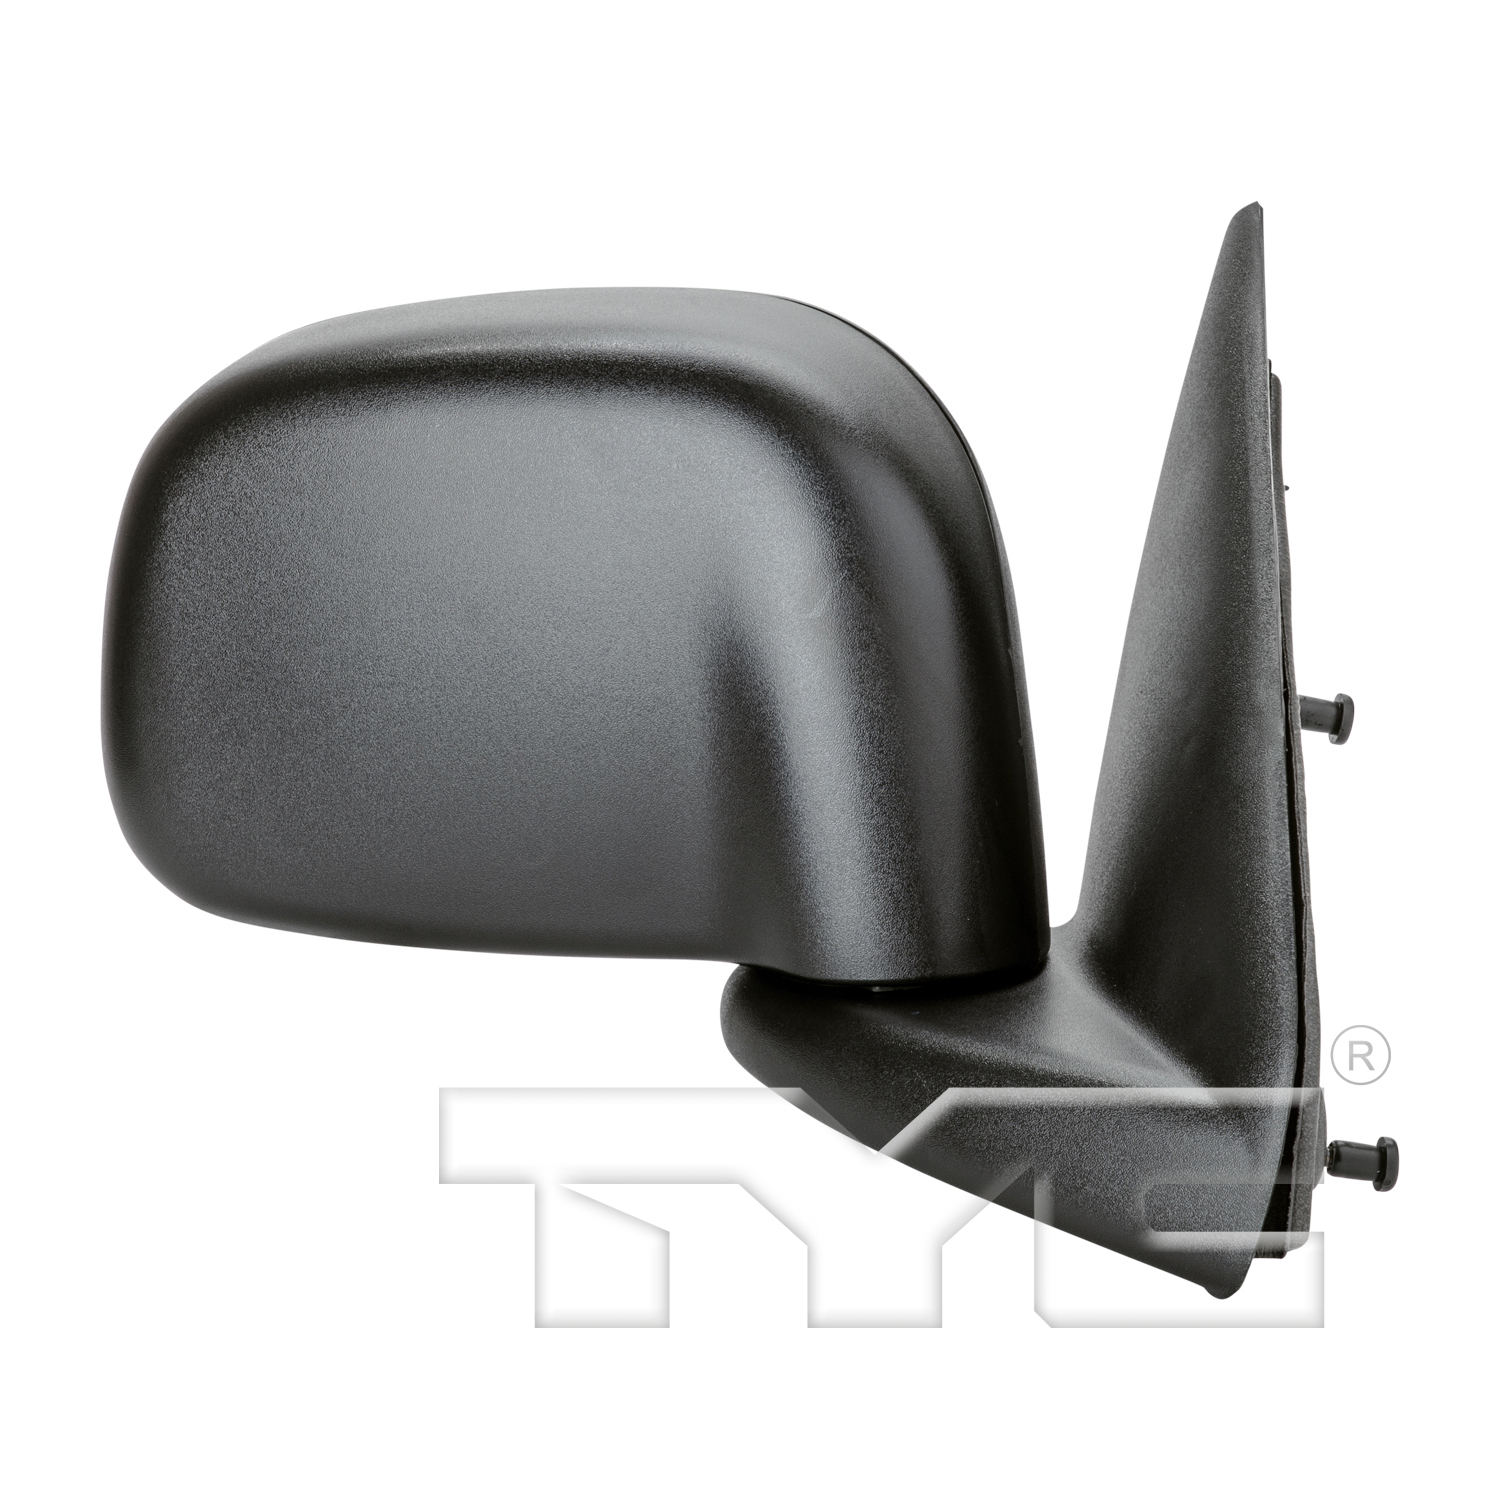 Aftermarket MIRRORS for DODGE - RAM 2500, RAM 2500,05-09,RT Mirror outside rear view